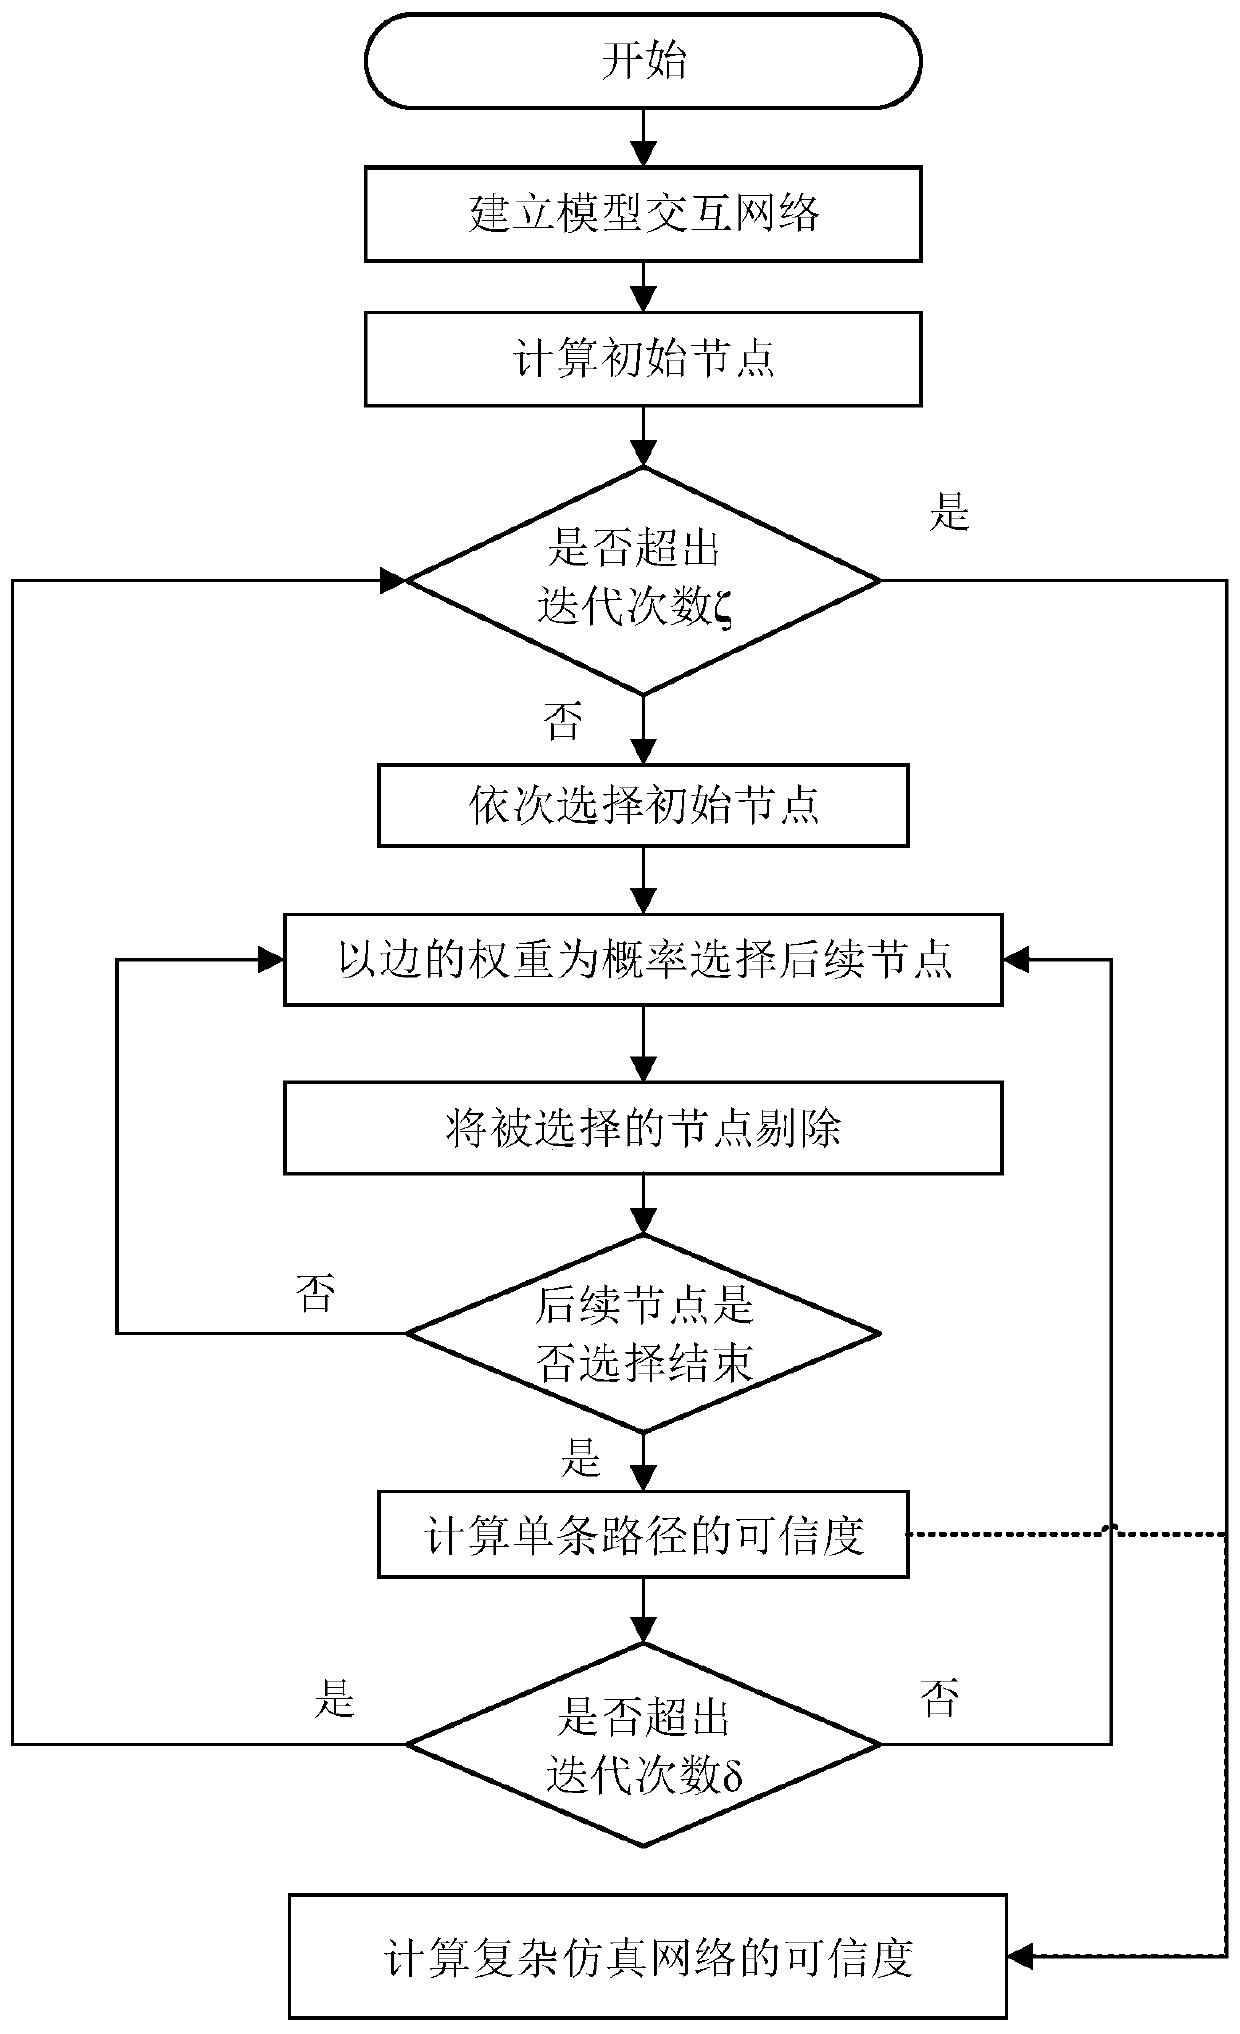 Complex simulation system credibility evaluation method based on network topology path